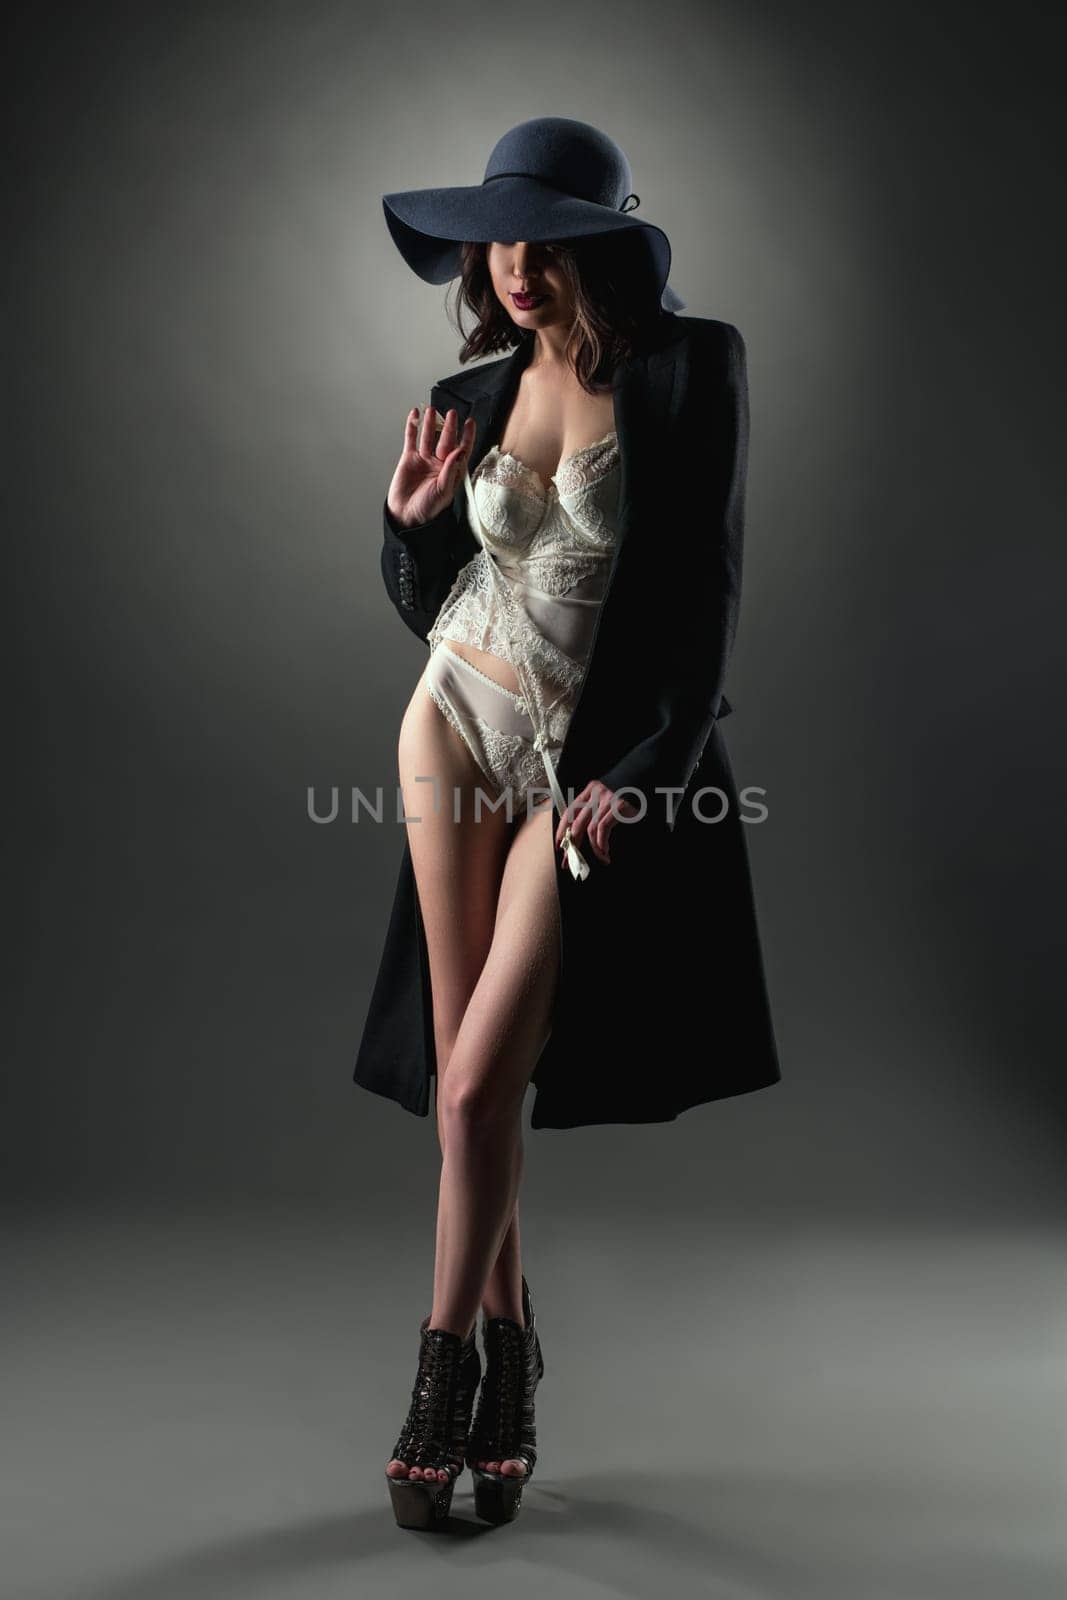 Image of model dressed in sexy lace lingerie, coat and hat